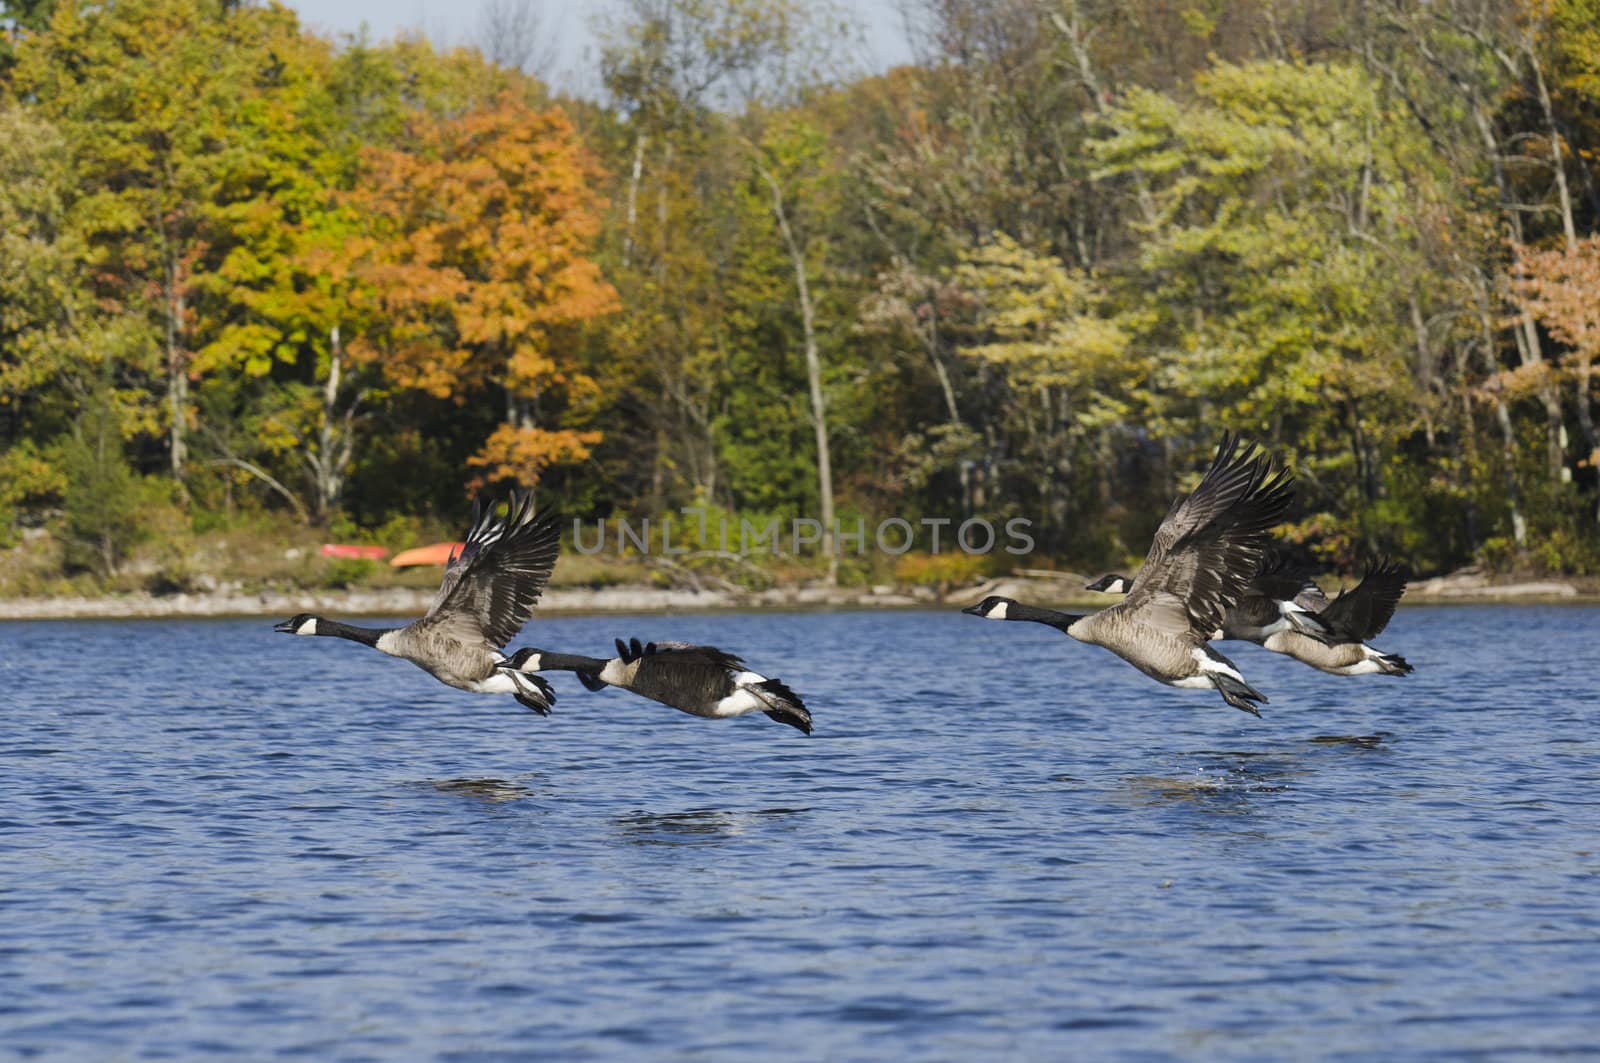 Four geese flying just above the water of a northern lake in autumn